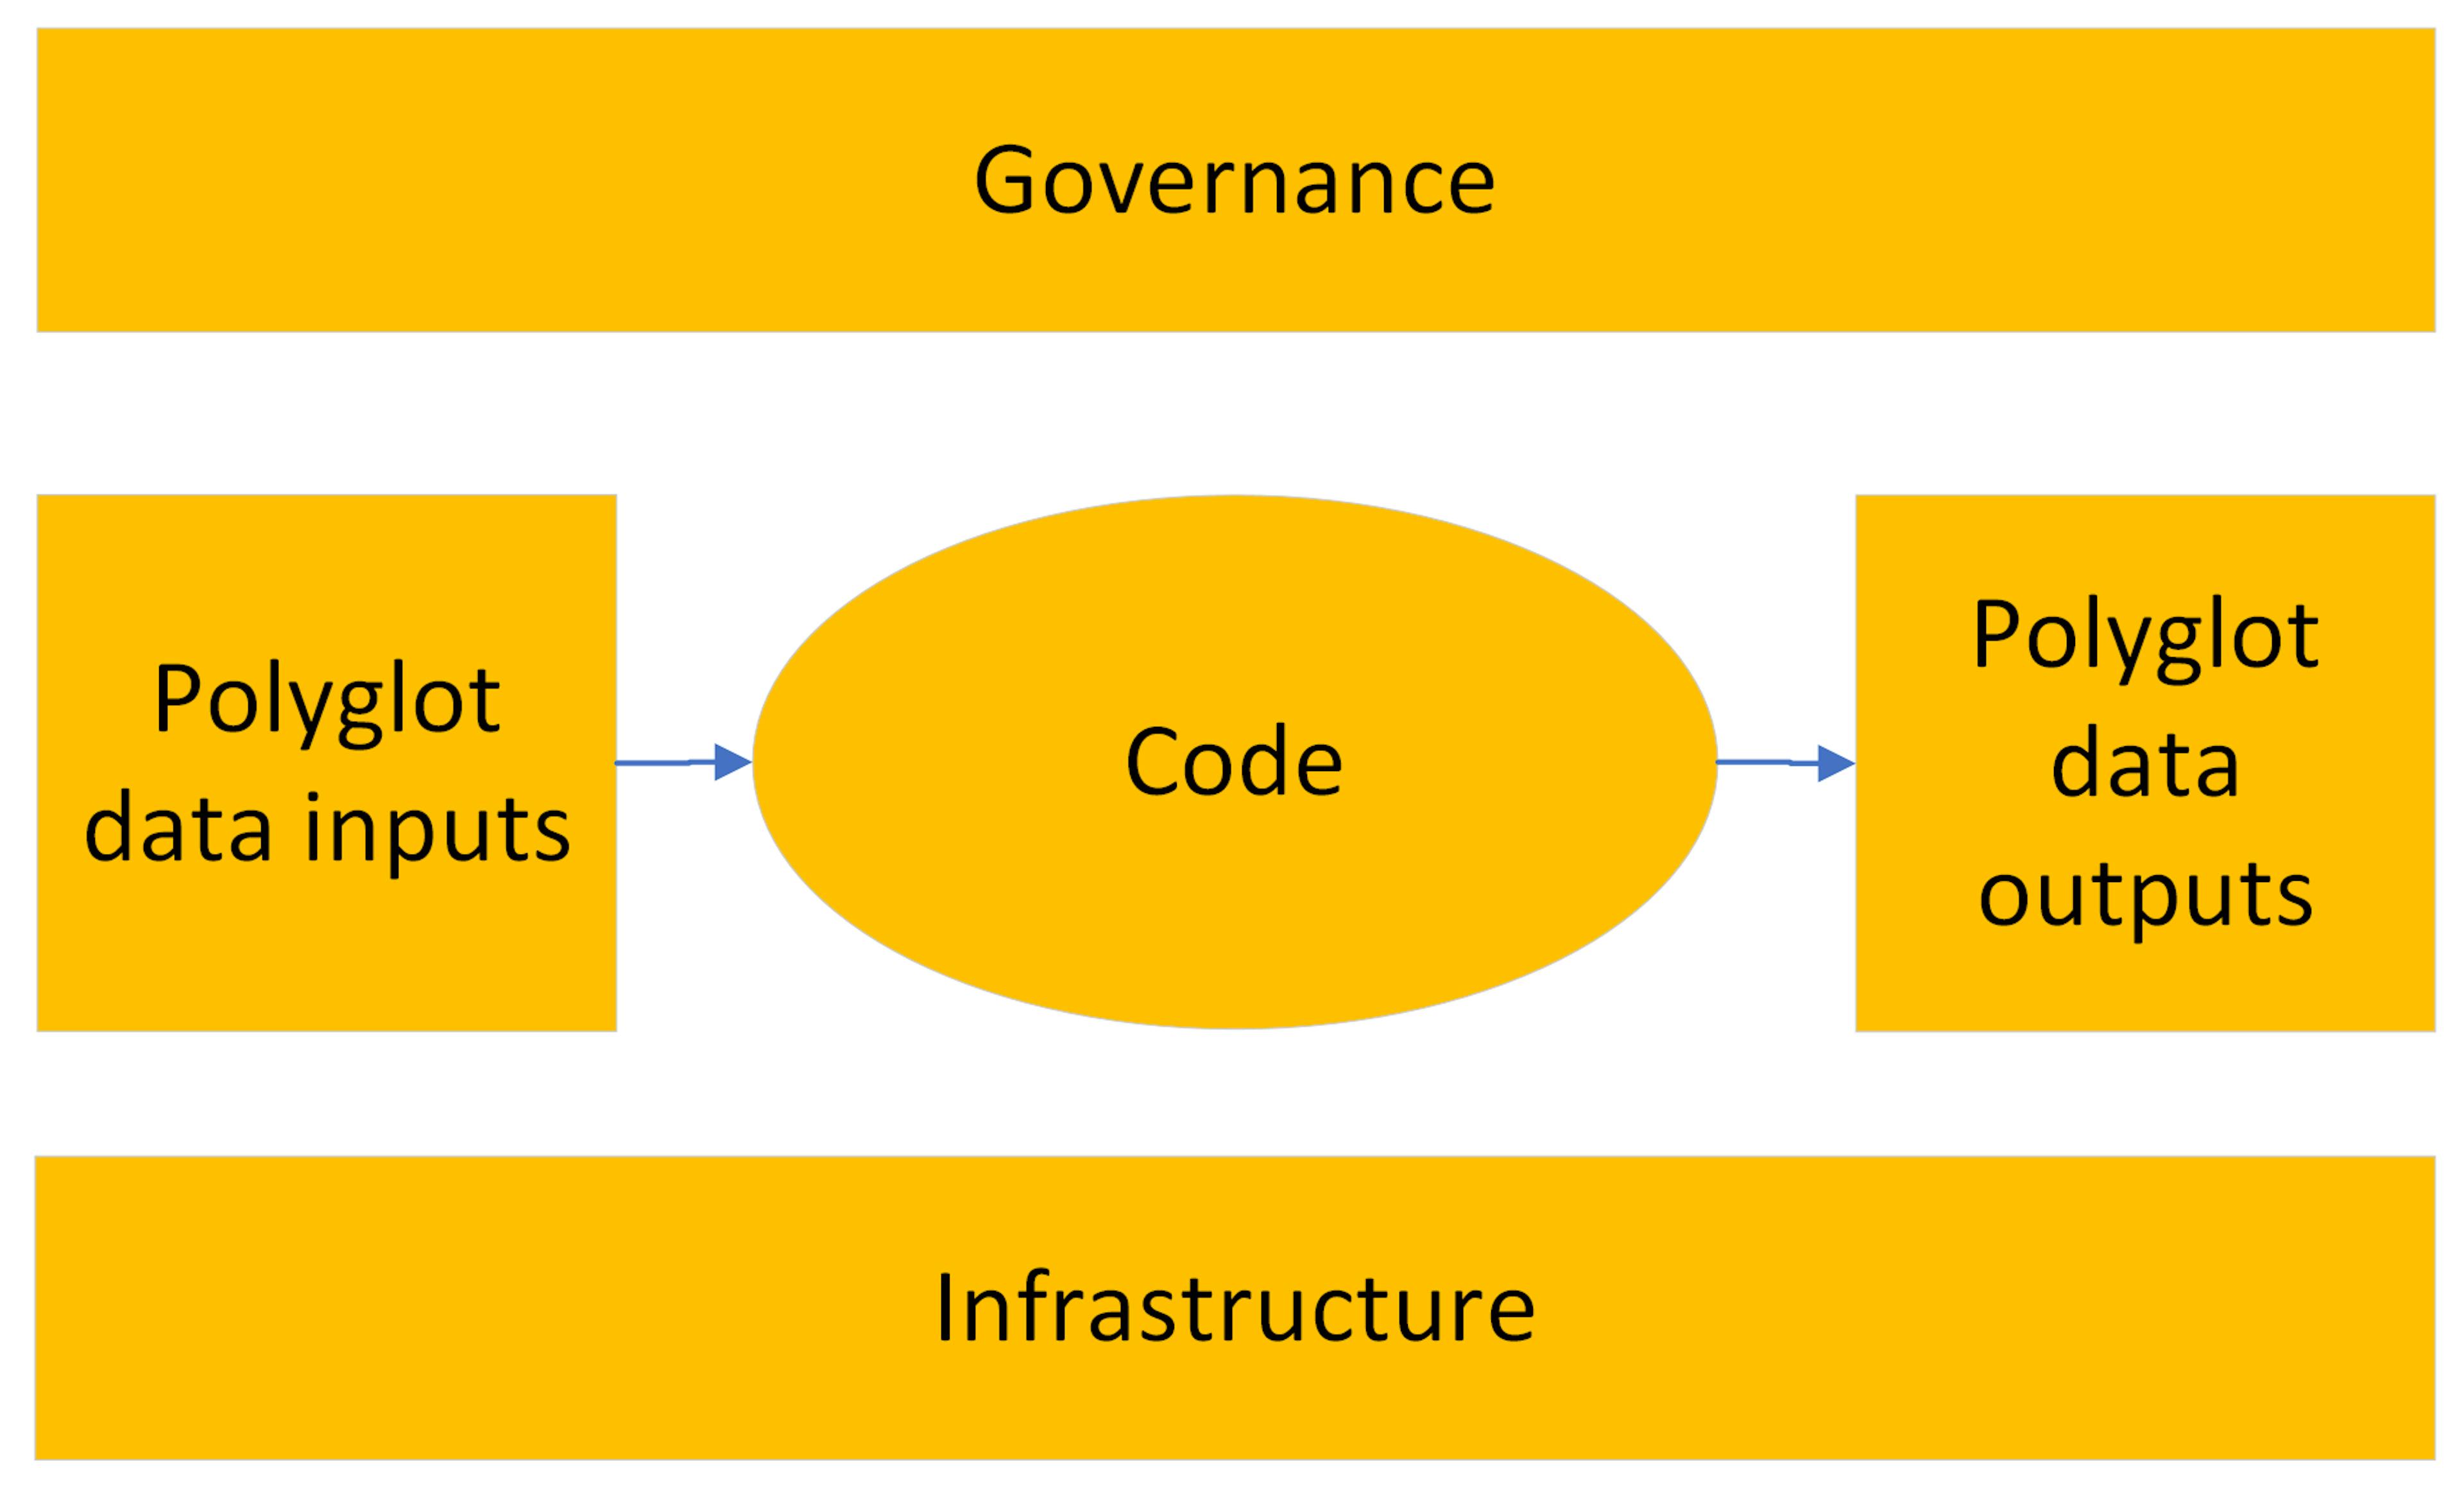 Data Product Anatomy. The Governance and Infrastructure is an important part of the full data product.